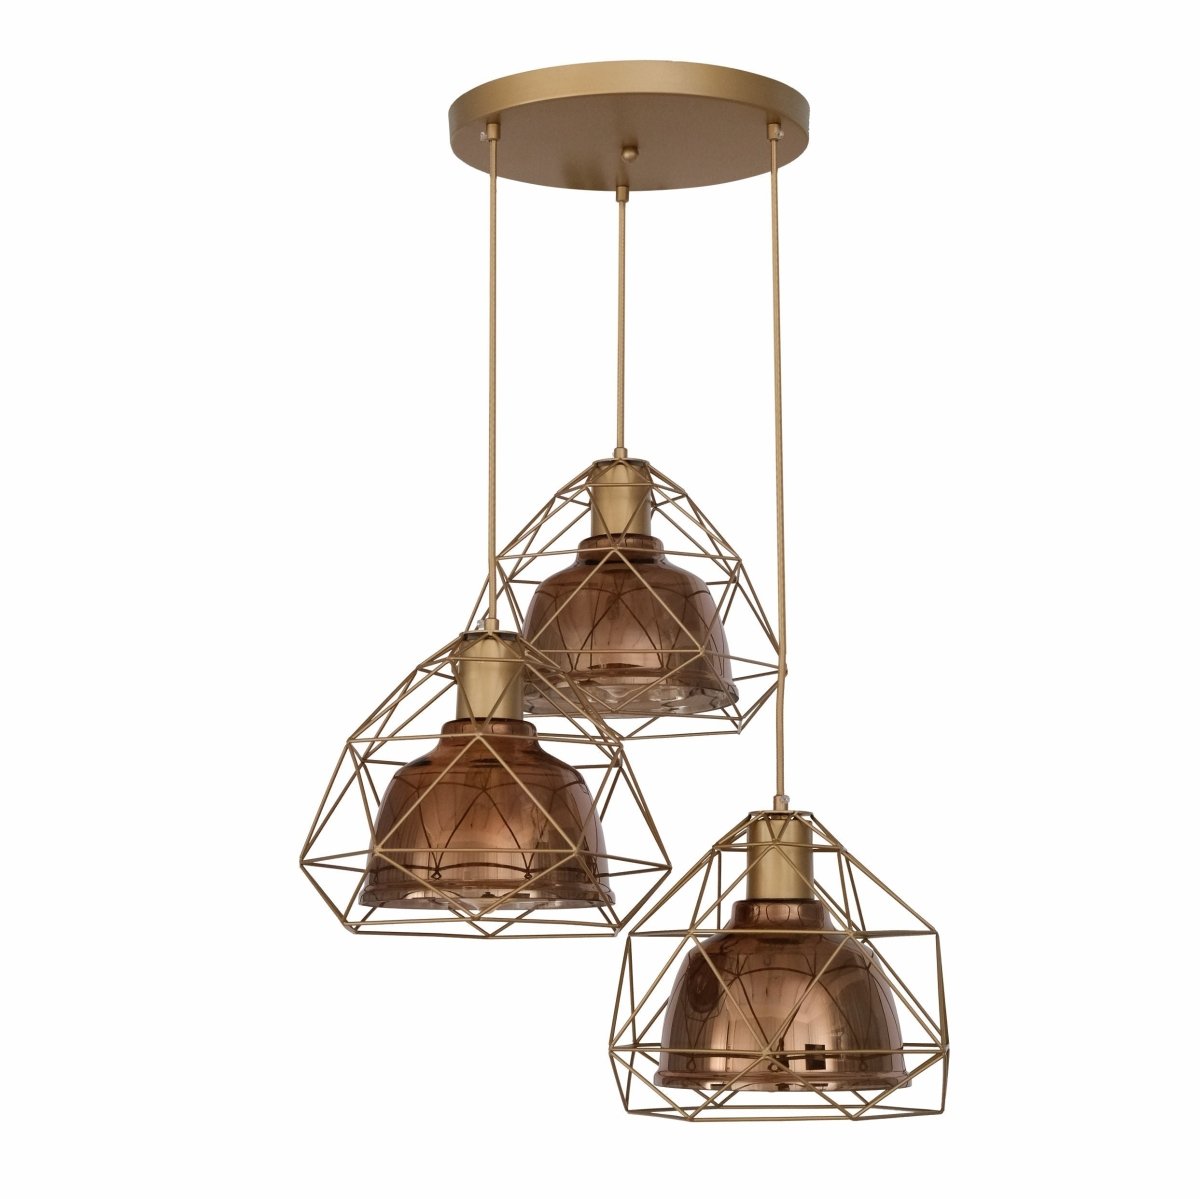 Main image of Copper Glass Dome Gold Metal Cage Pendant Light with 3xE27 Fitting | TEKLED 156-19476